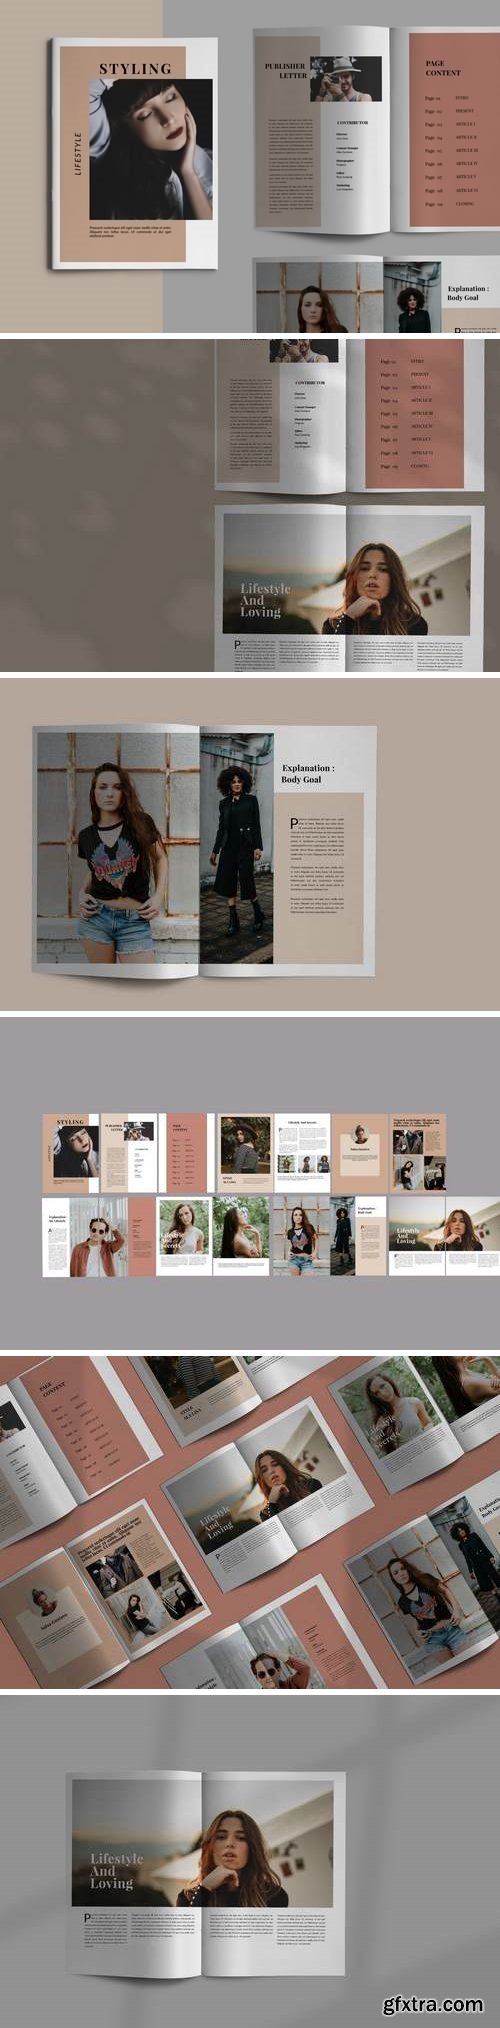 Styling Fashioned - Brochure